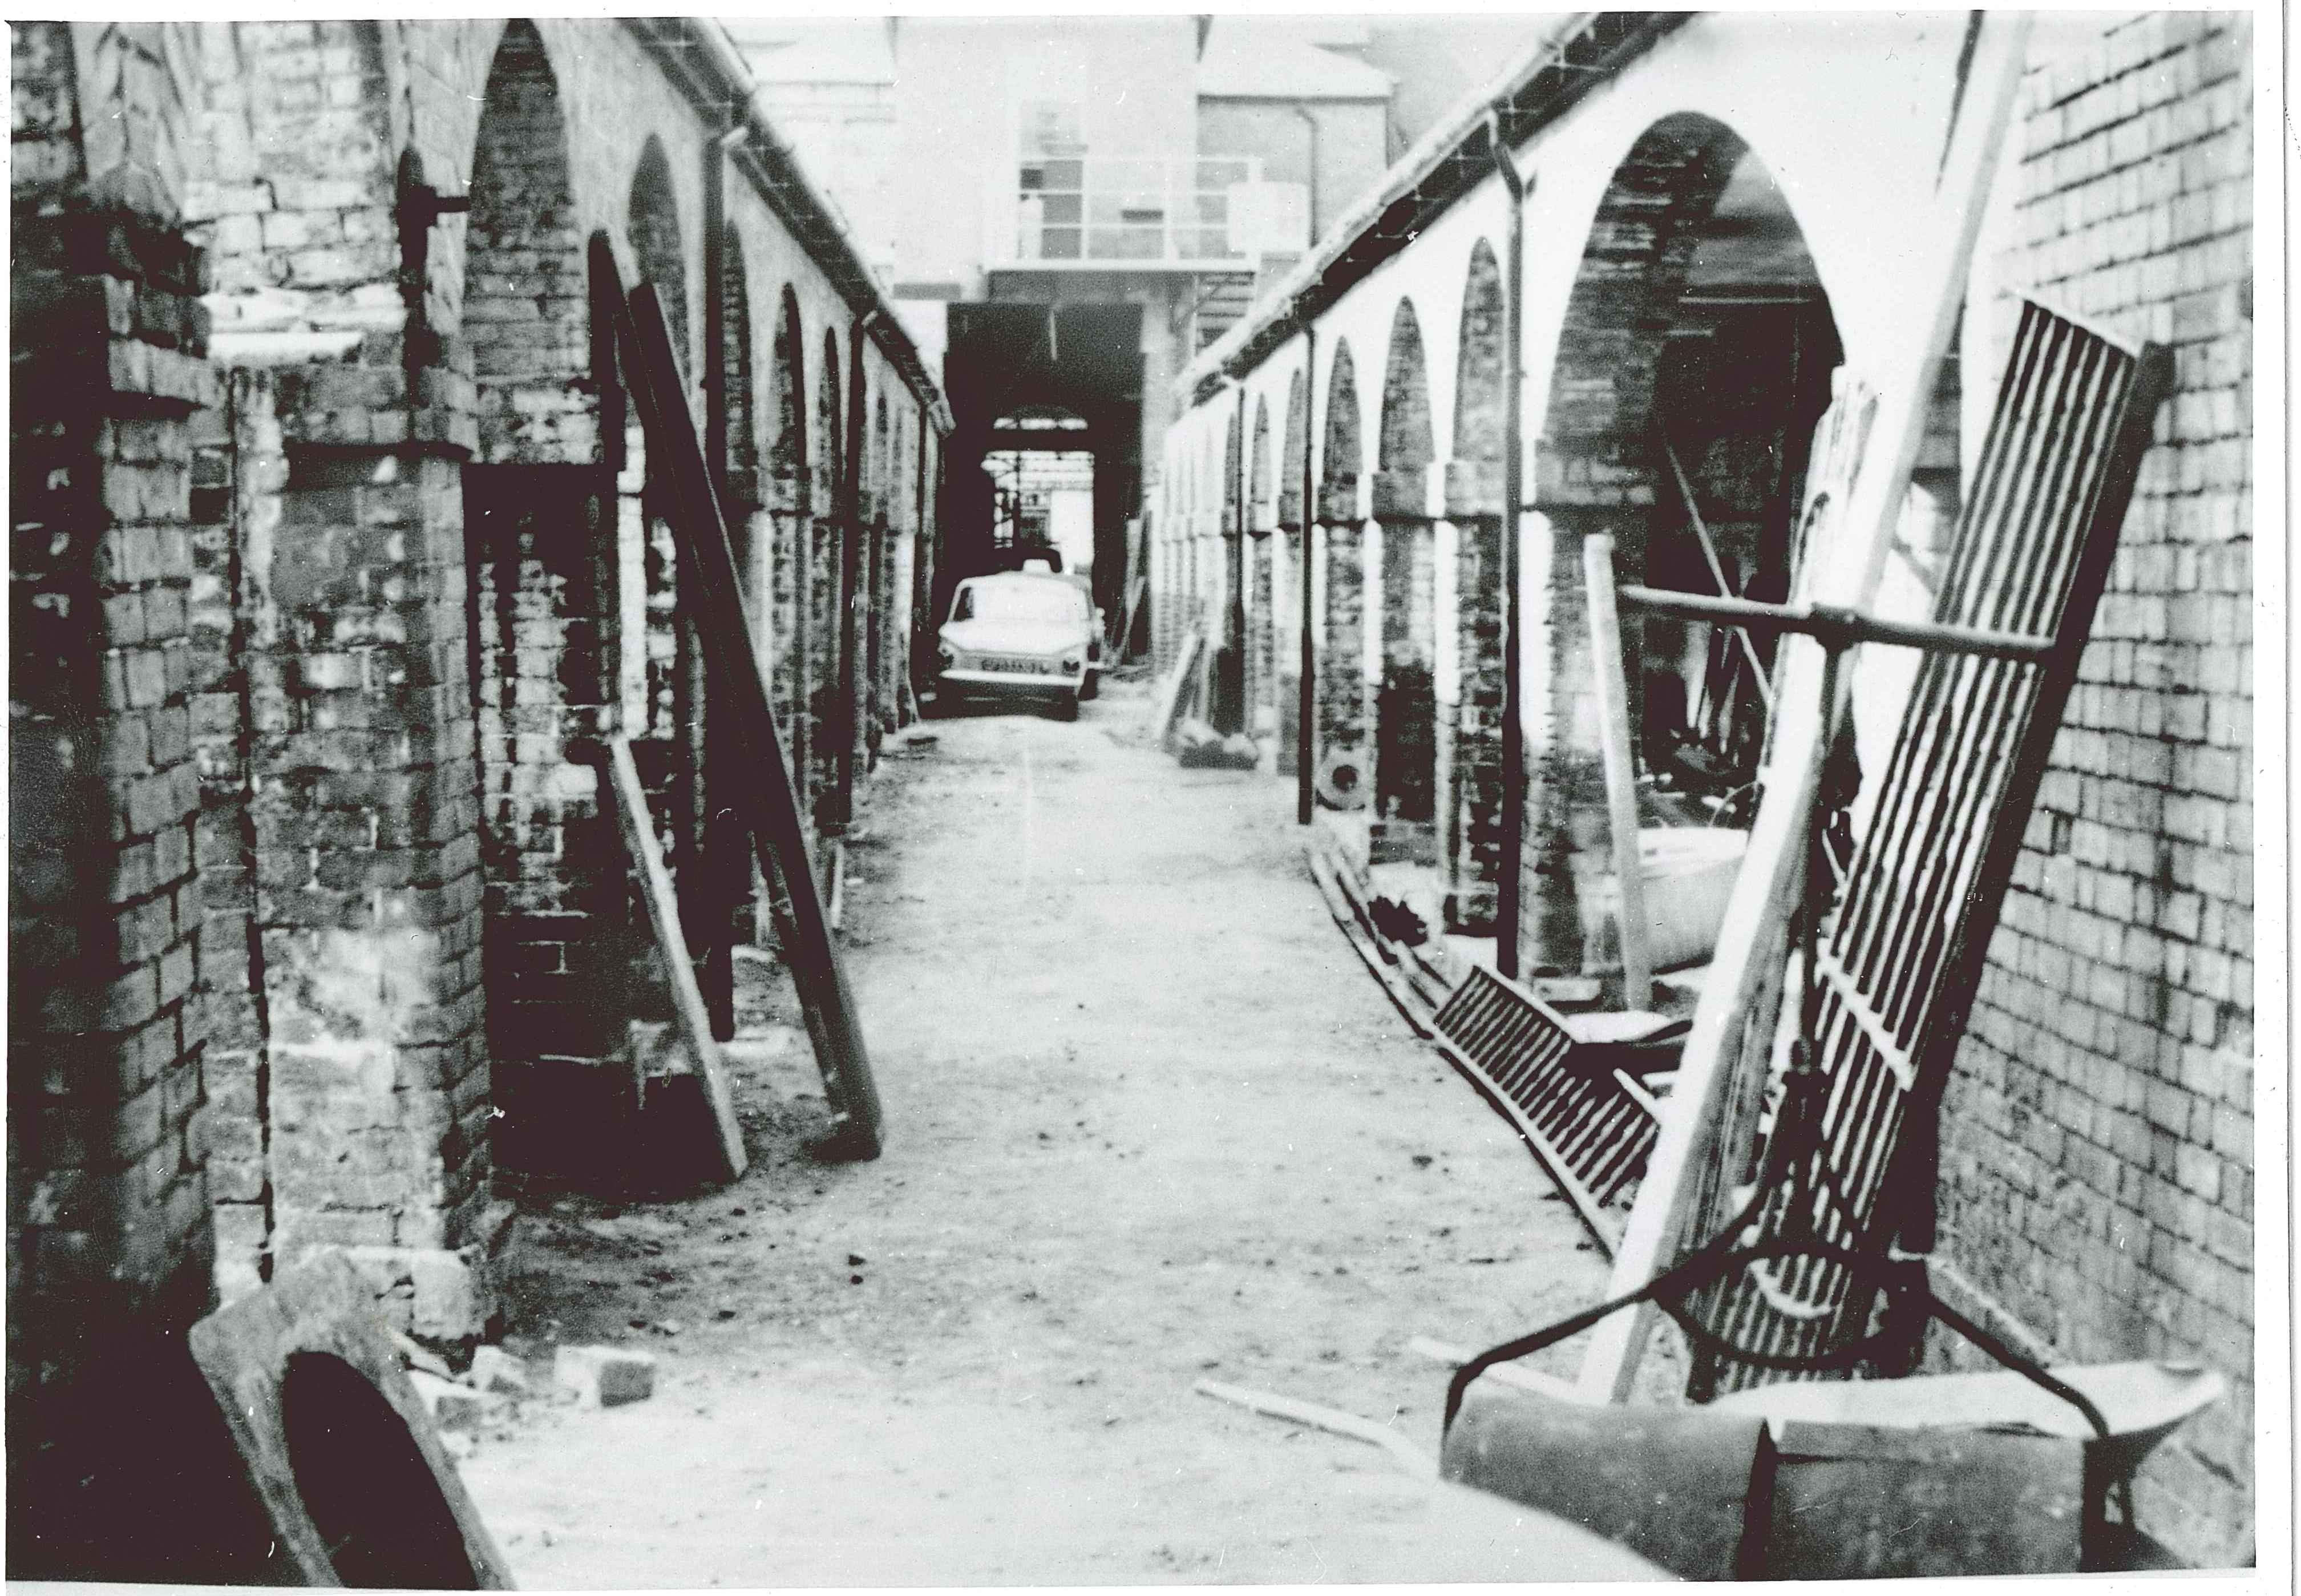 Old cobbled walkway surrounded on either side by brick archways and industrial machinery